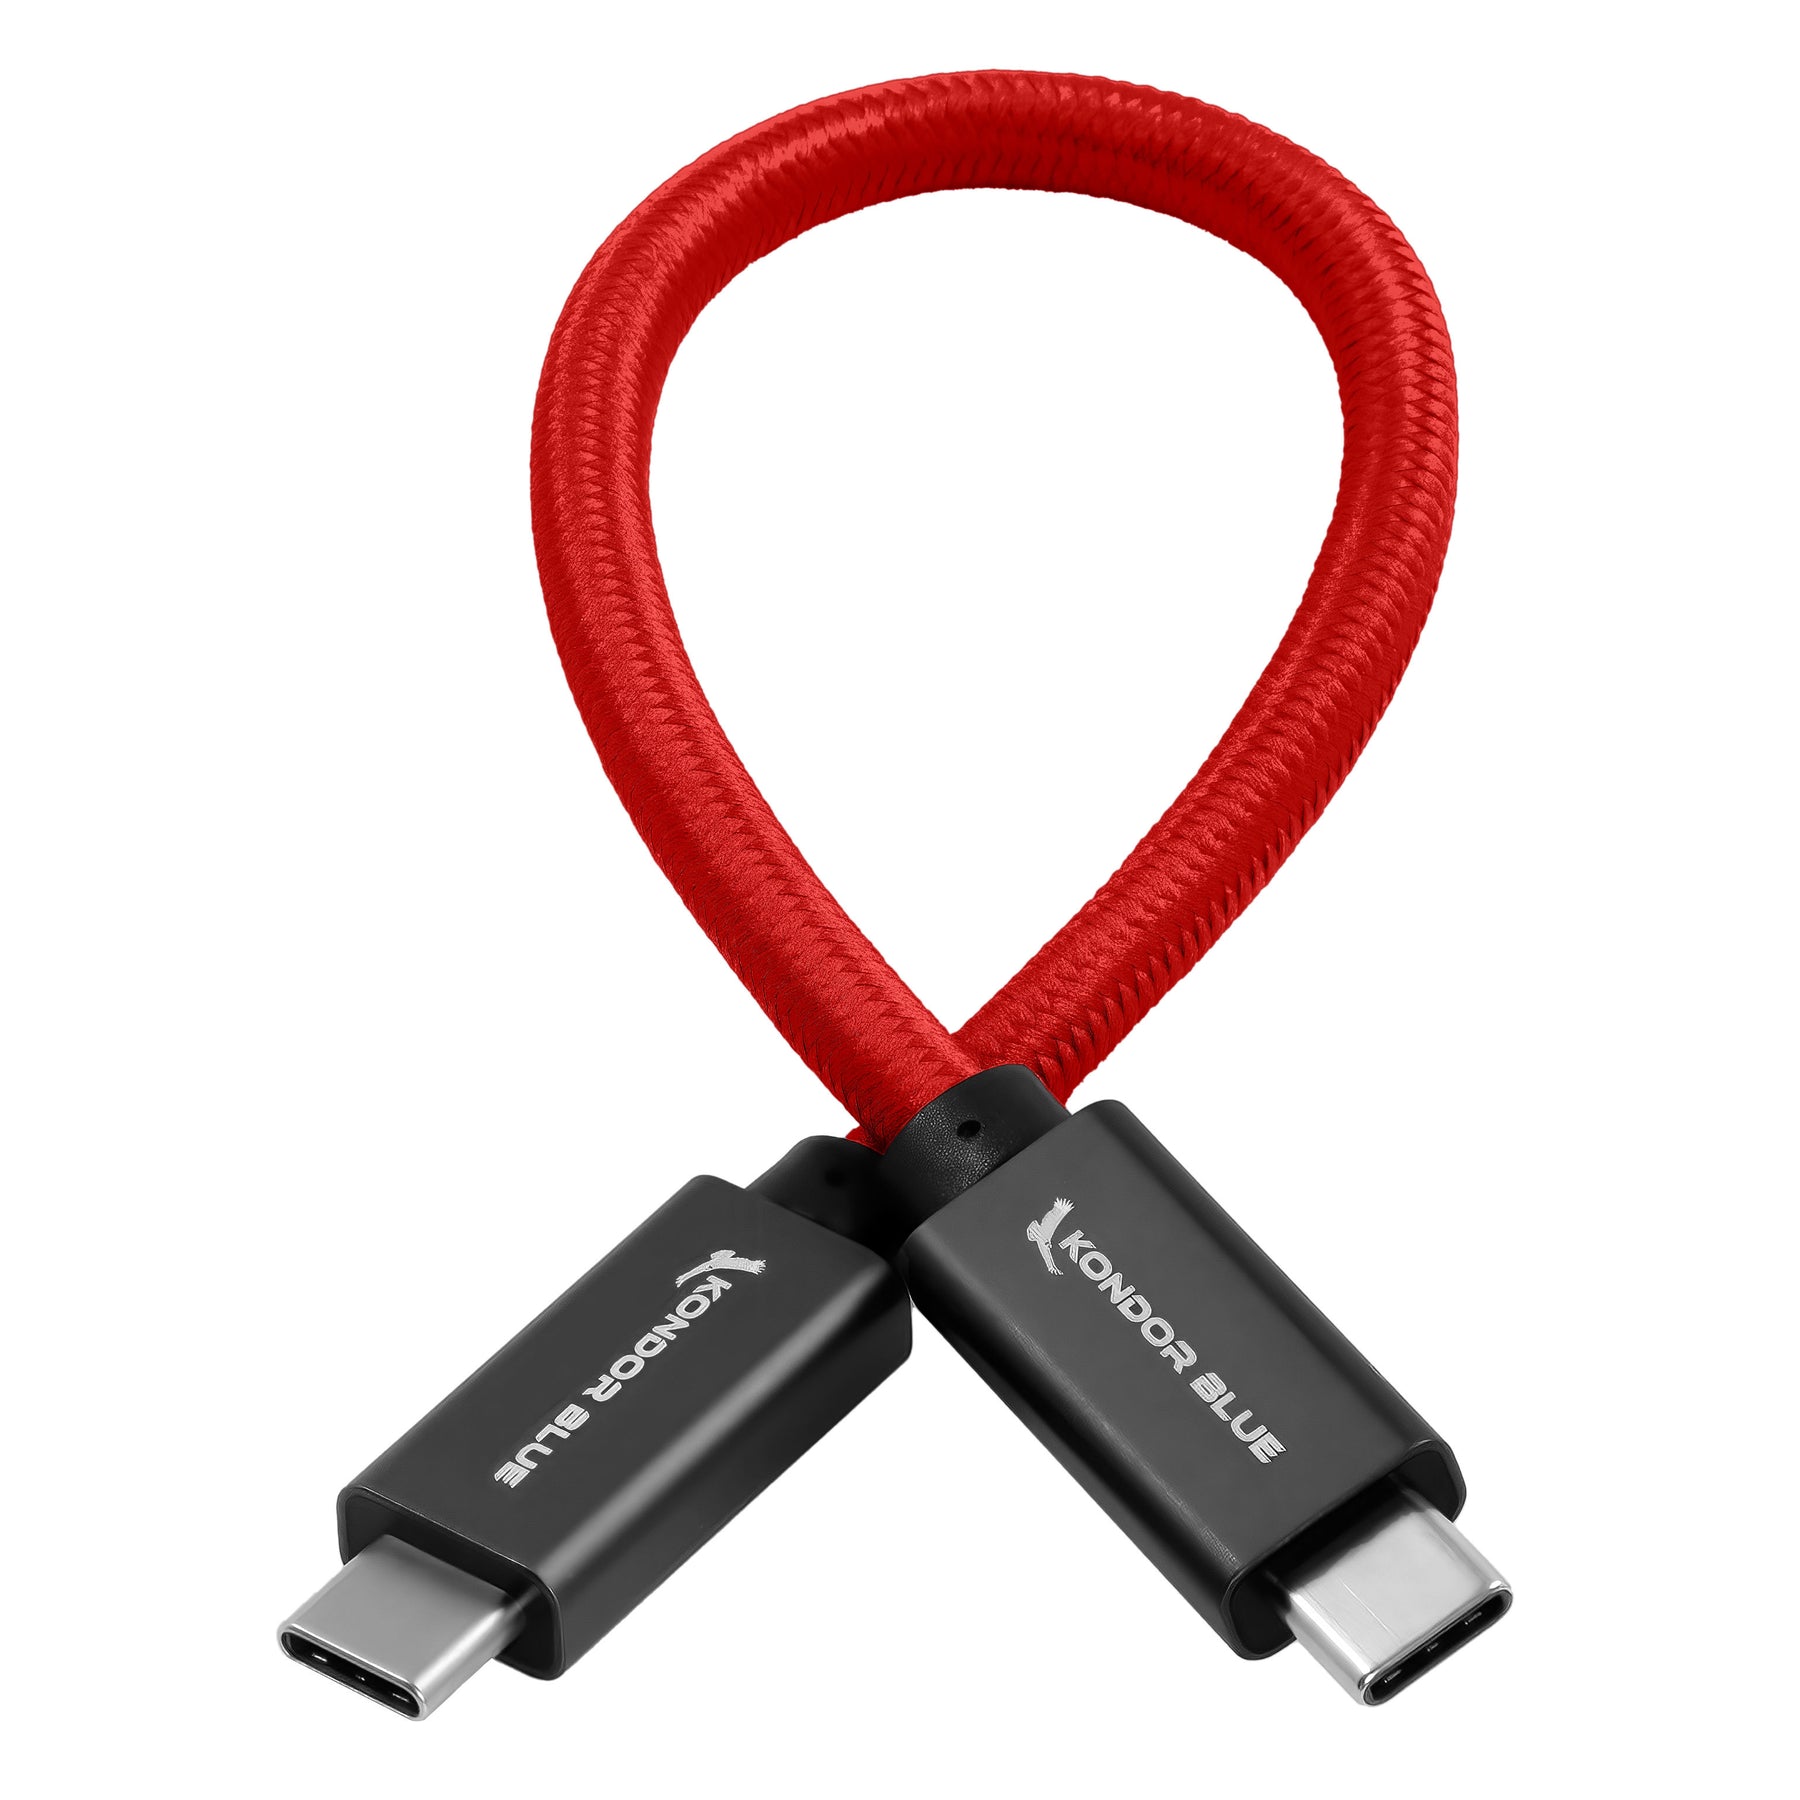 1 ft USB Y Cable for External Hard Drive - Micro USB Cables